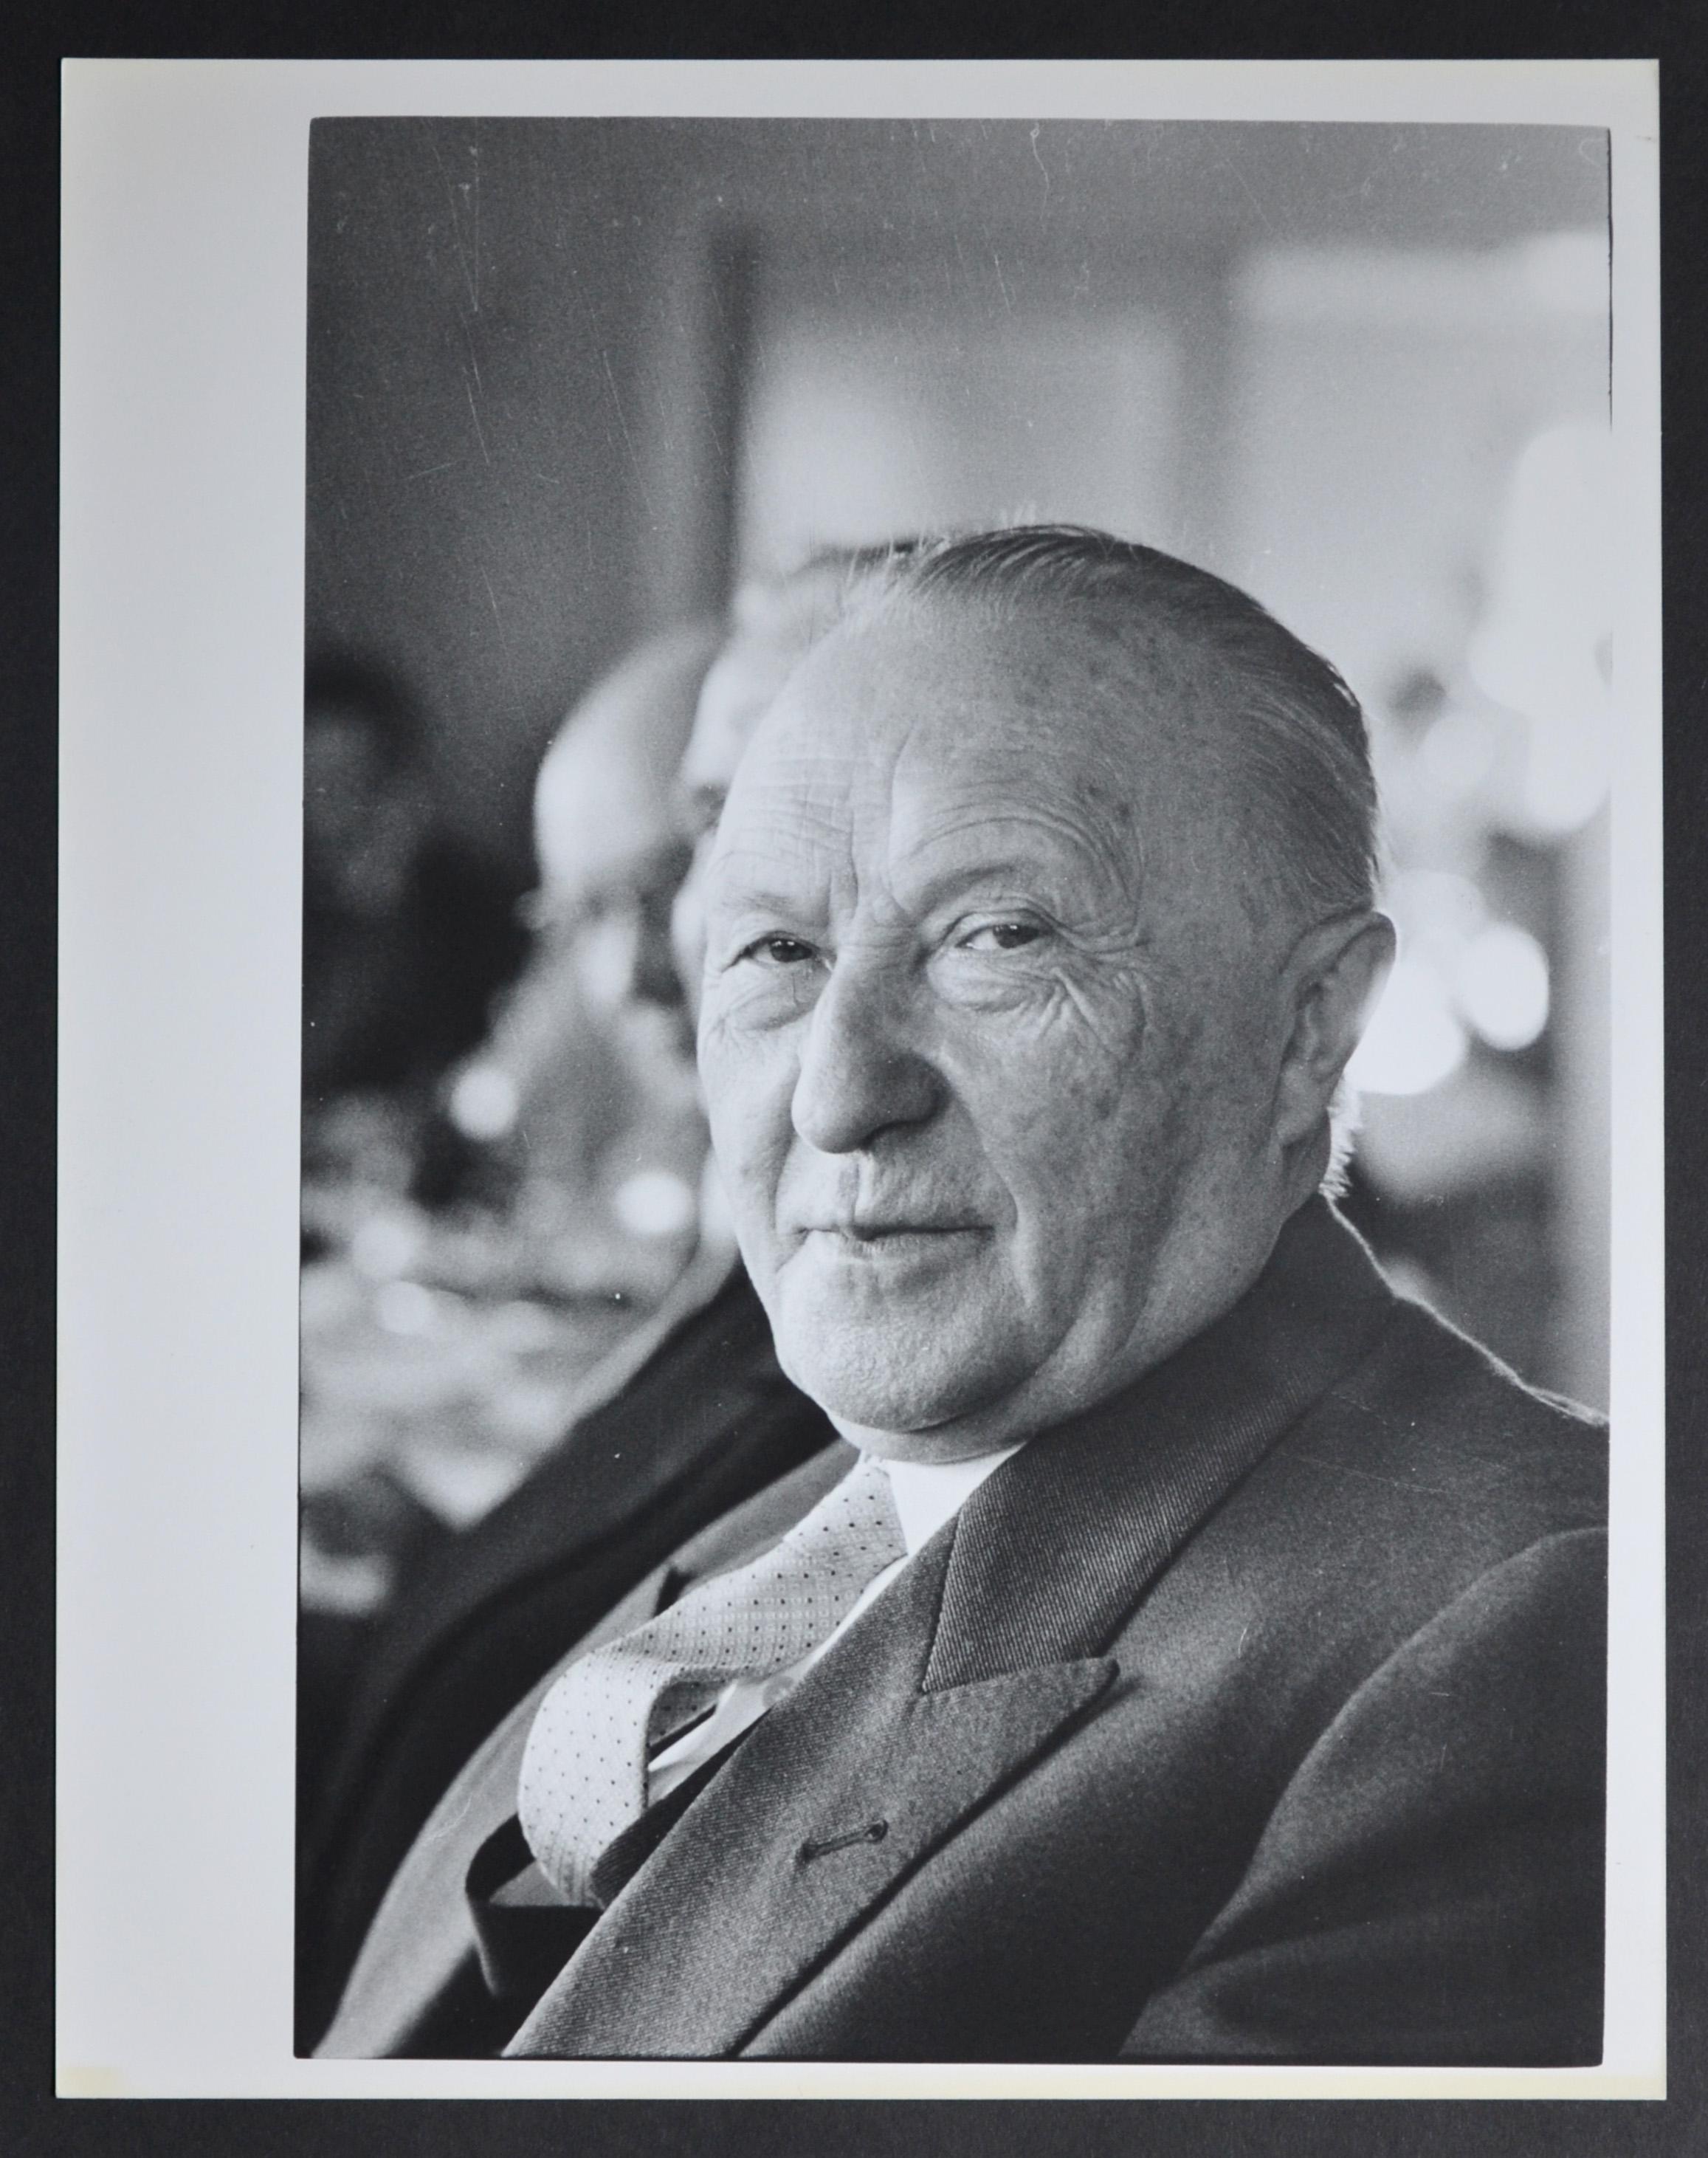 Rolf Gillhausen Black and White Photograph - Portrait of Chancellor Konrad Adenauer, West Germany 1950s.